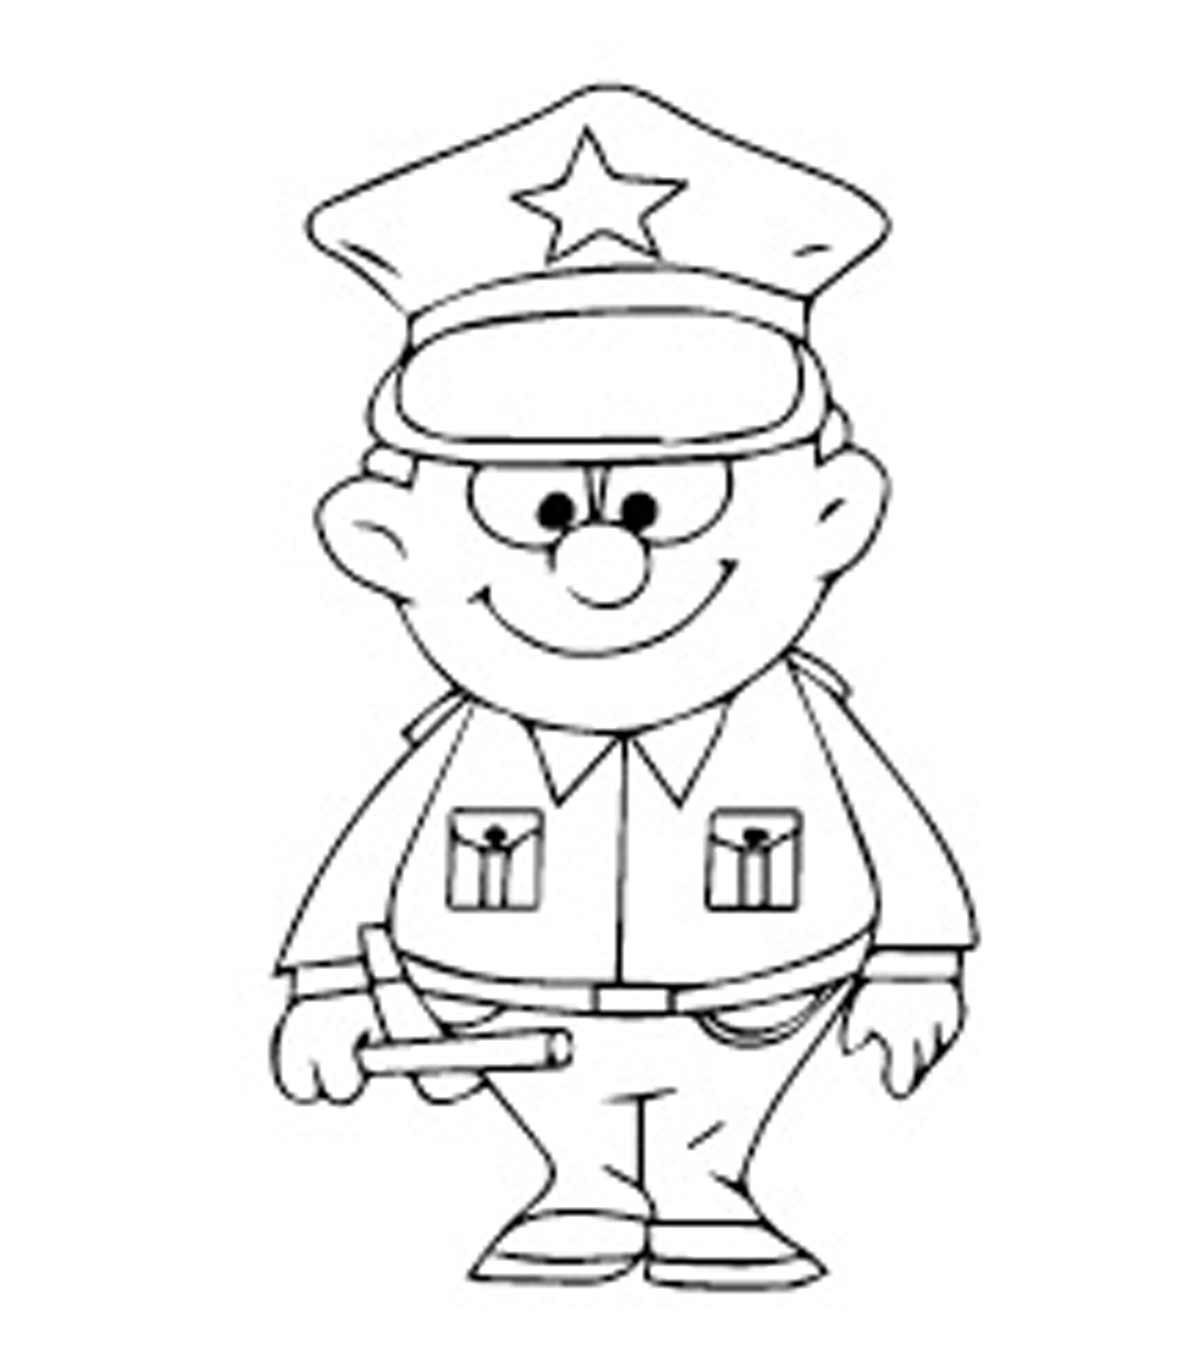 10 Best Police & Police Car Coloring Pages Your Toddler Will Love